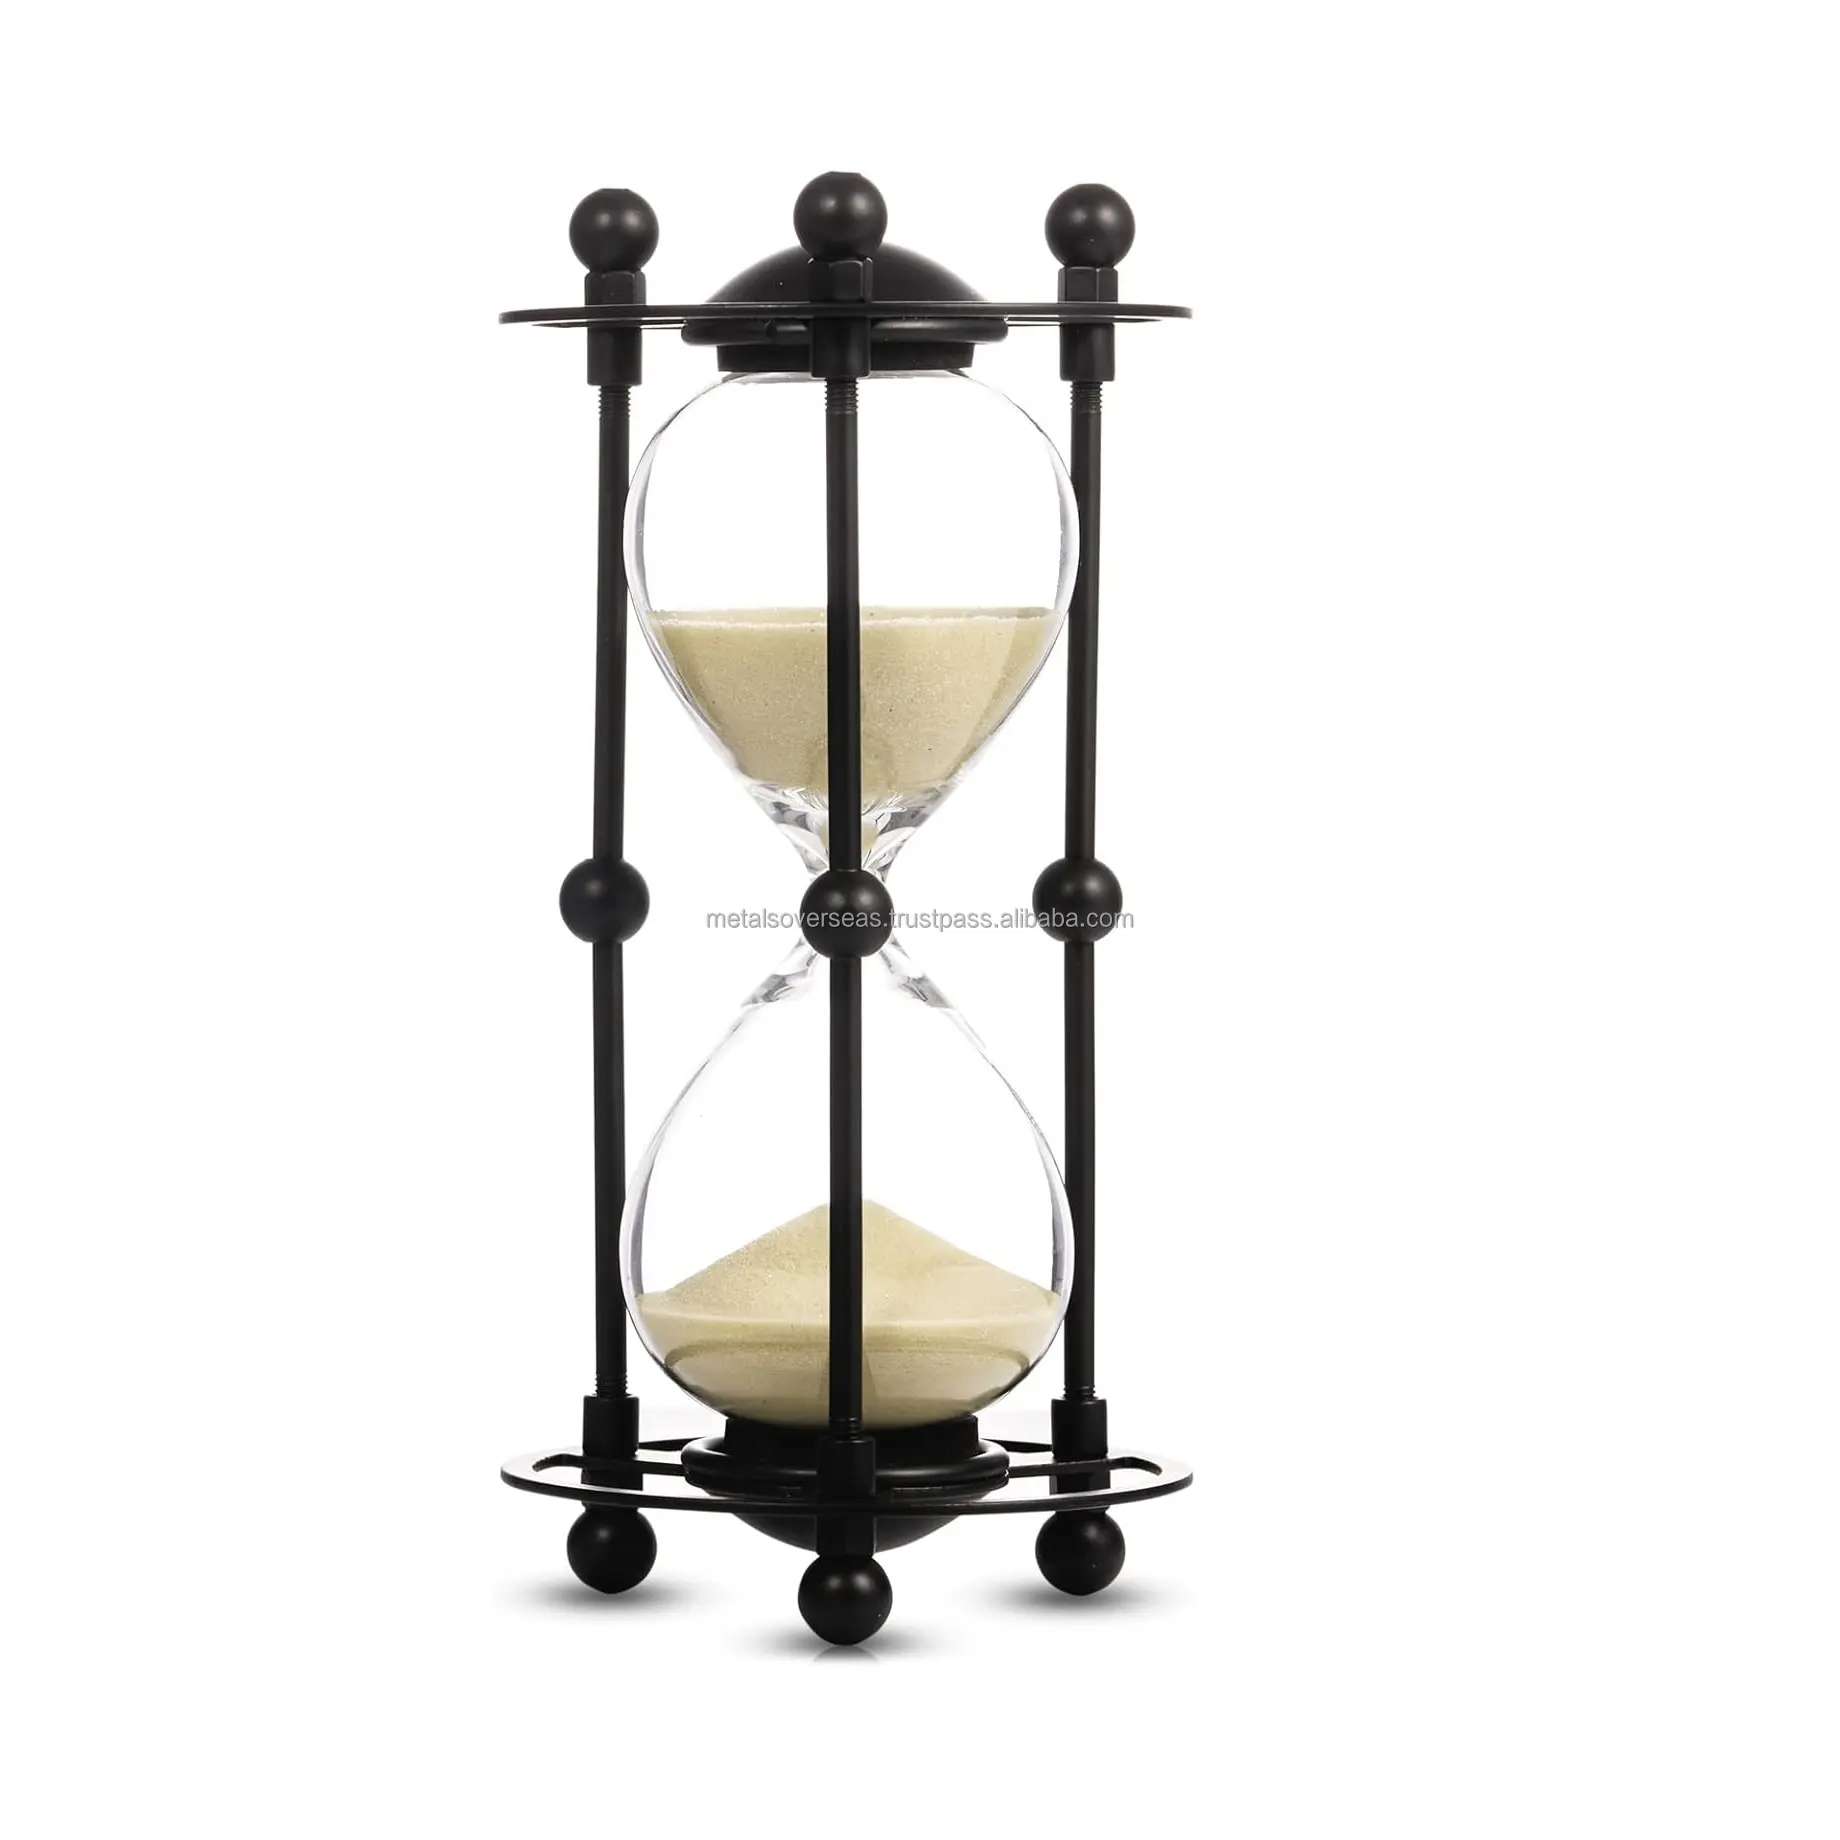 Hourglass 15 Minute Sand Timer Vintage Metal Hour Glass for Home Office Desk Decor Unique Sand Clock Gifts